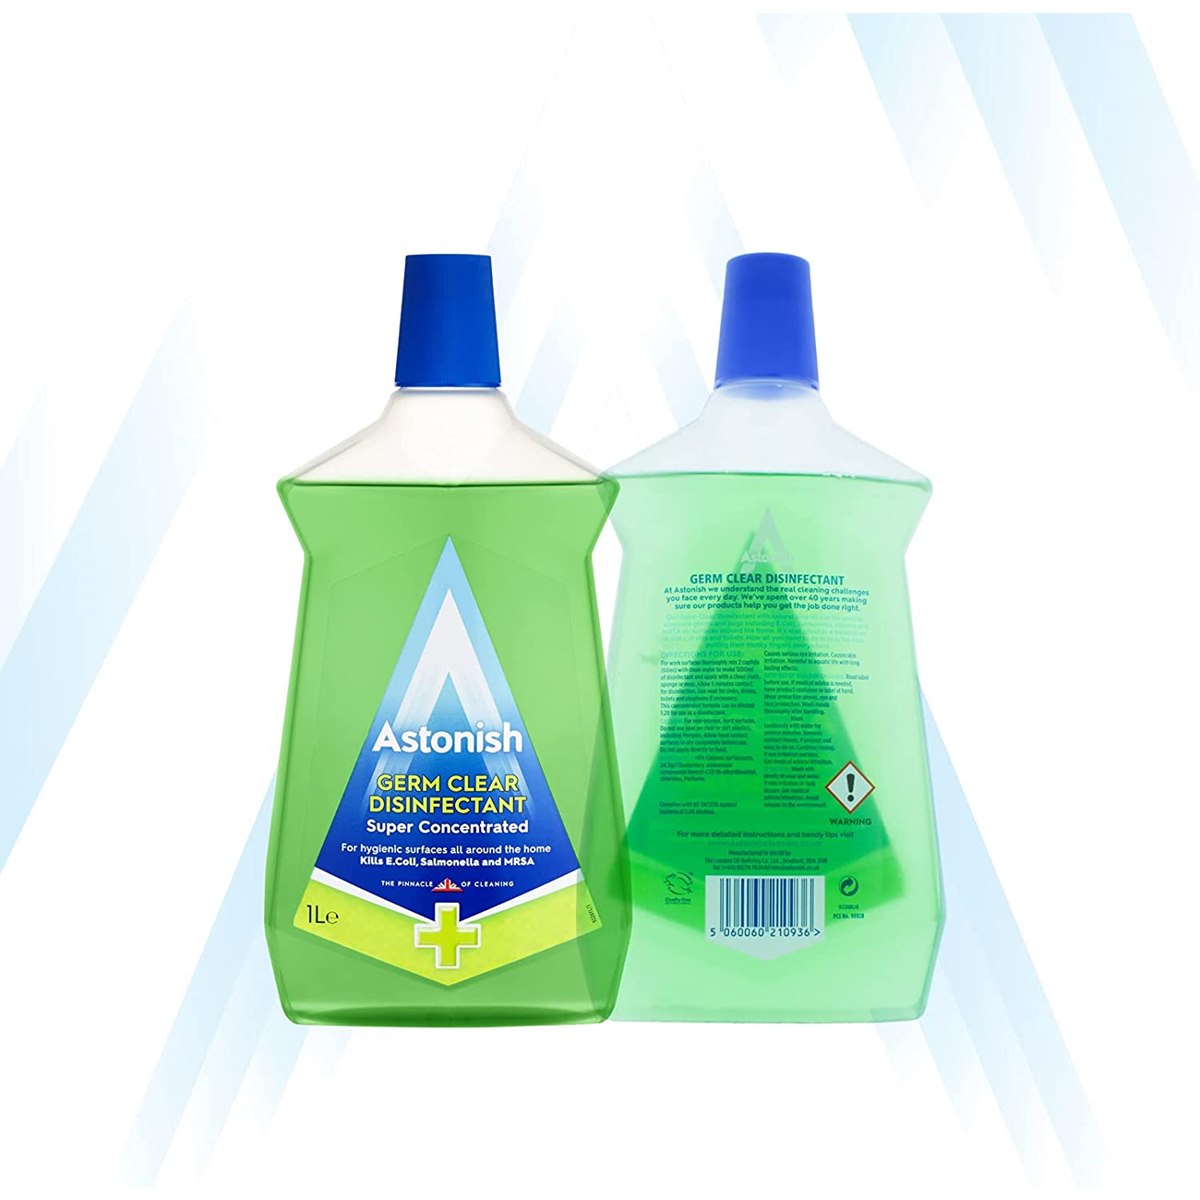 Where to Buy Astonish Germ Clear Disinfectant